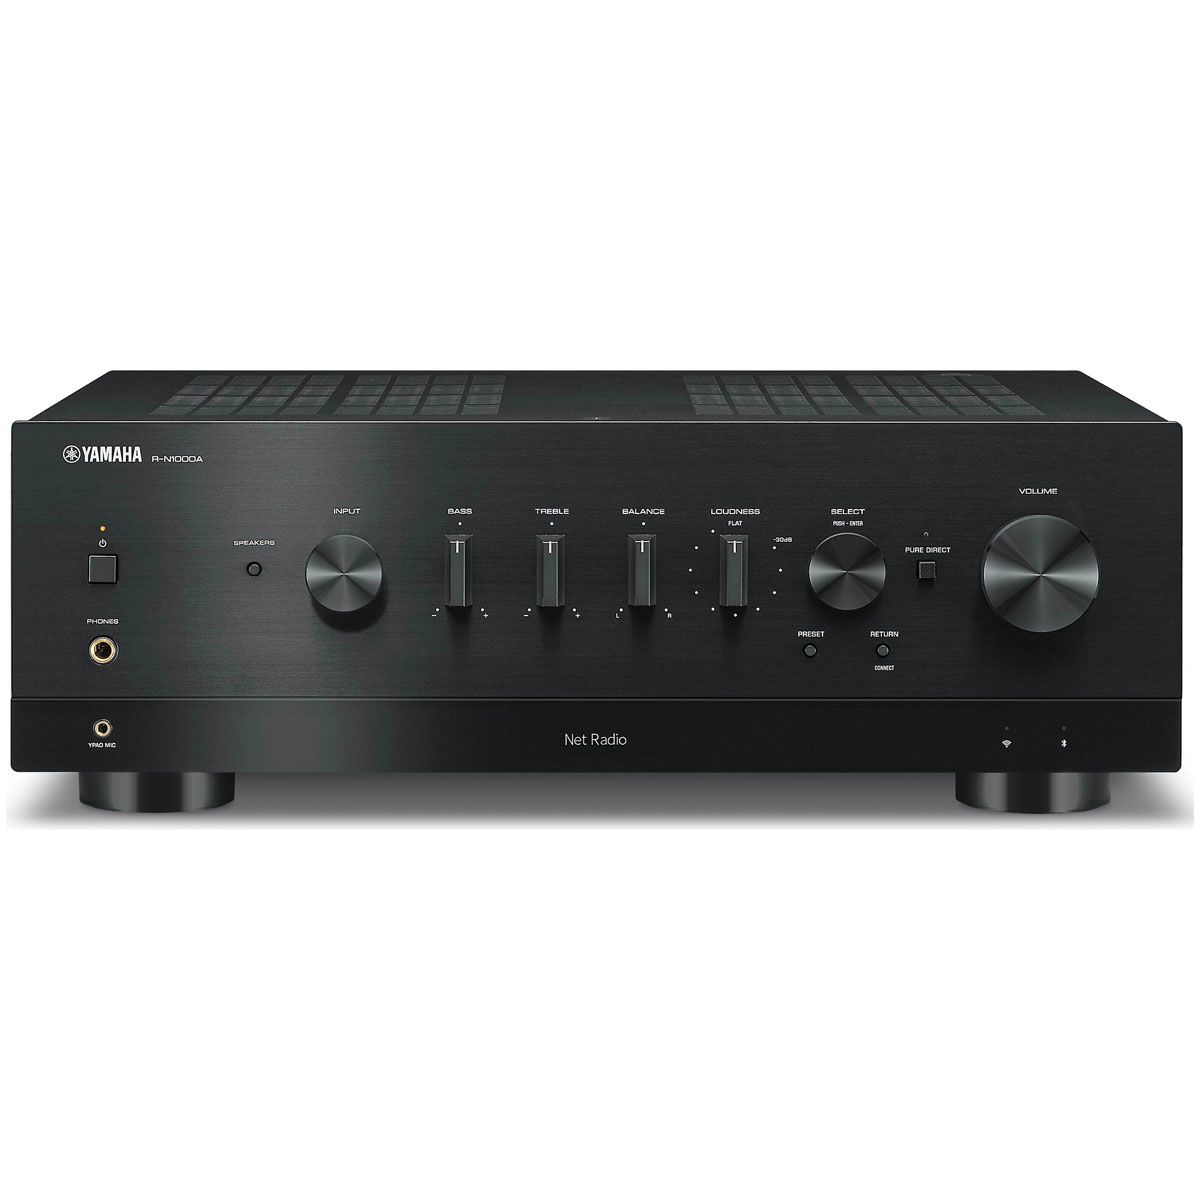 Yamaha R-N1000A Network Stereo Receiver black front view